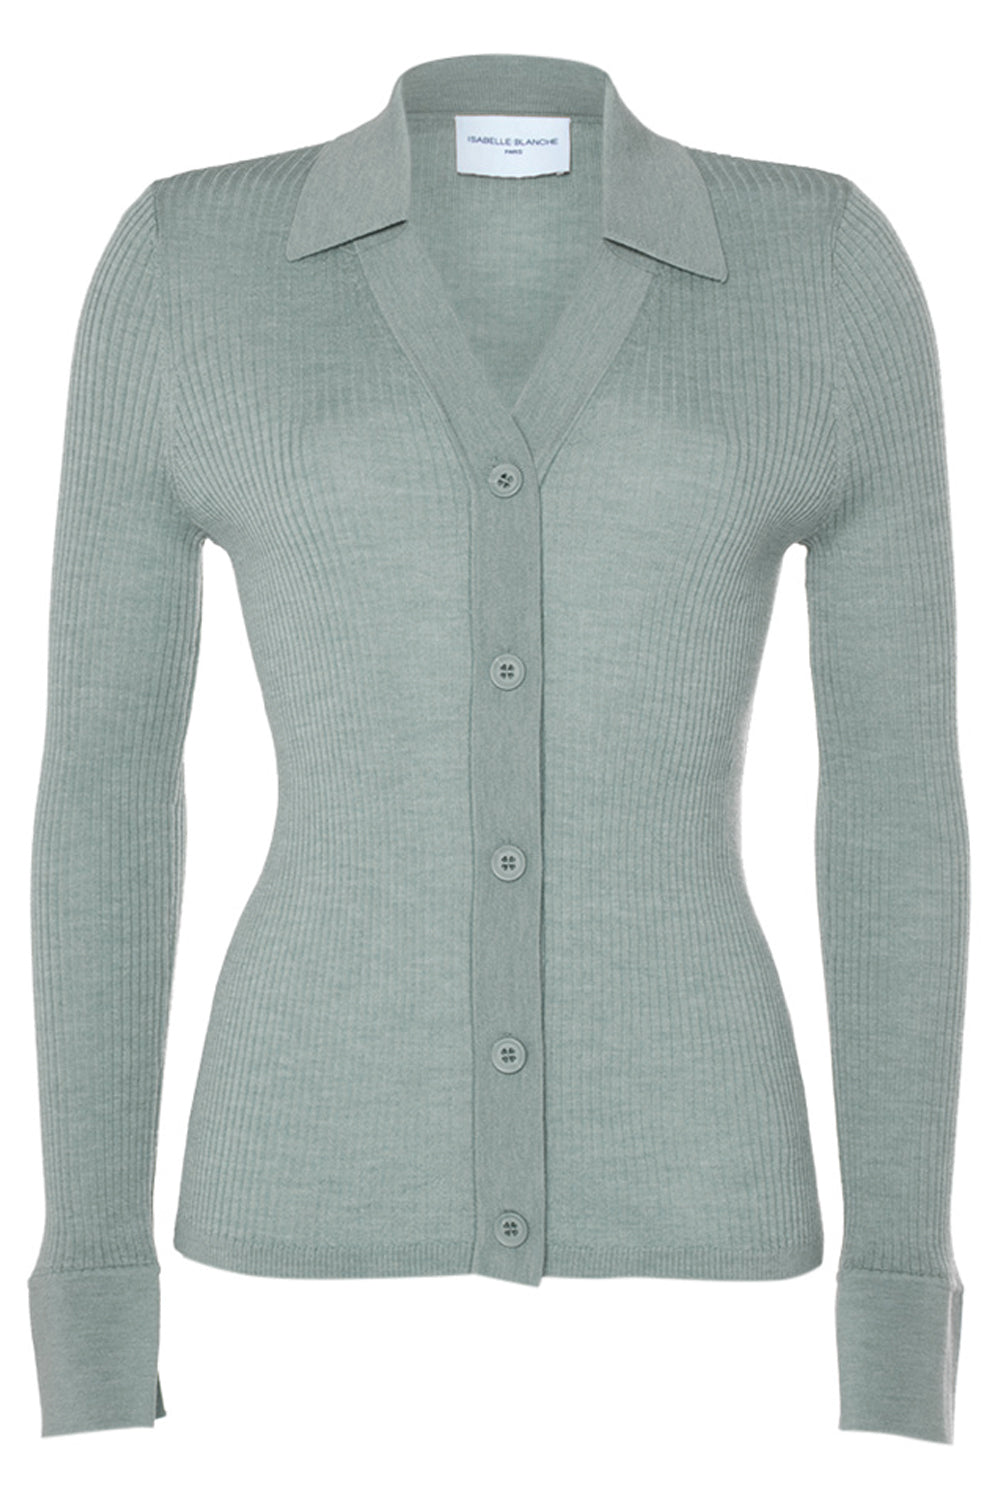 ISABELLE BLANCHE Cardigan in lana Cardigan ISABELLE BLANCHE   